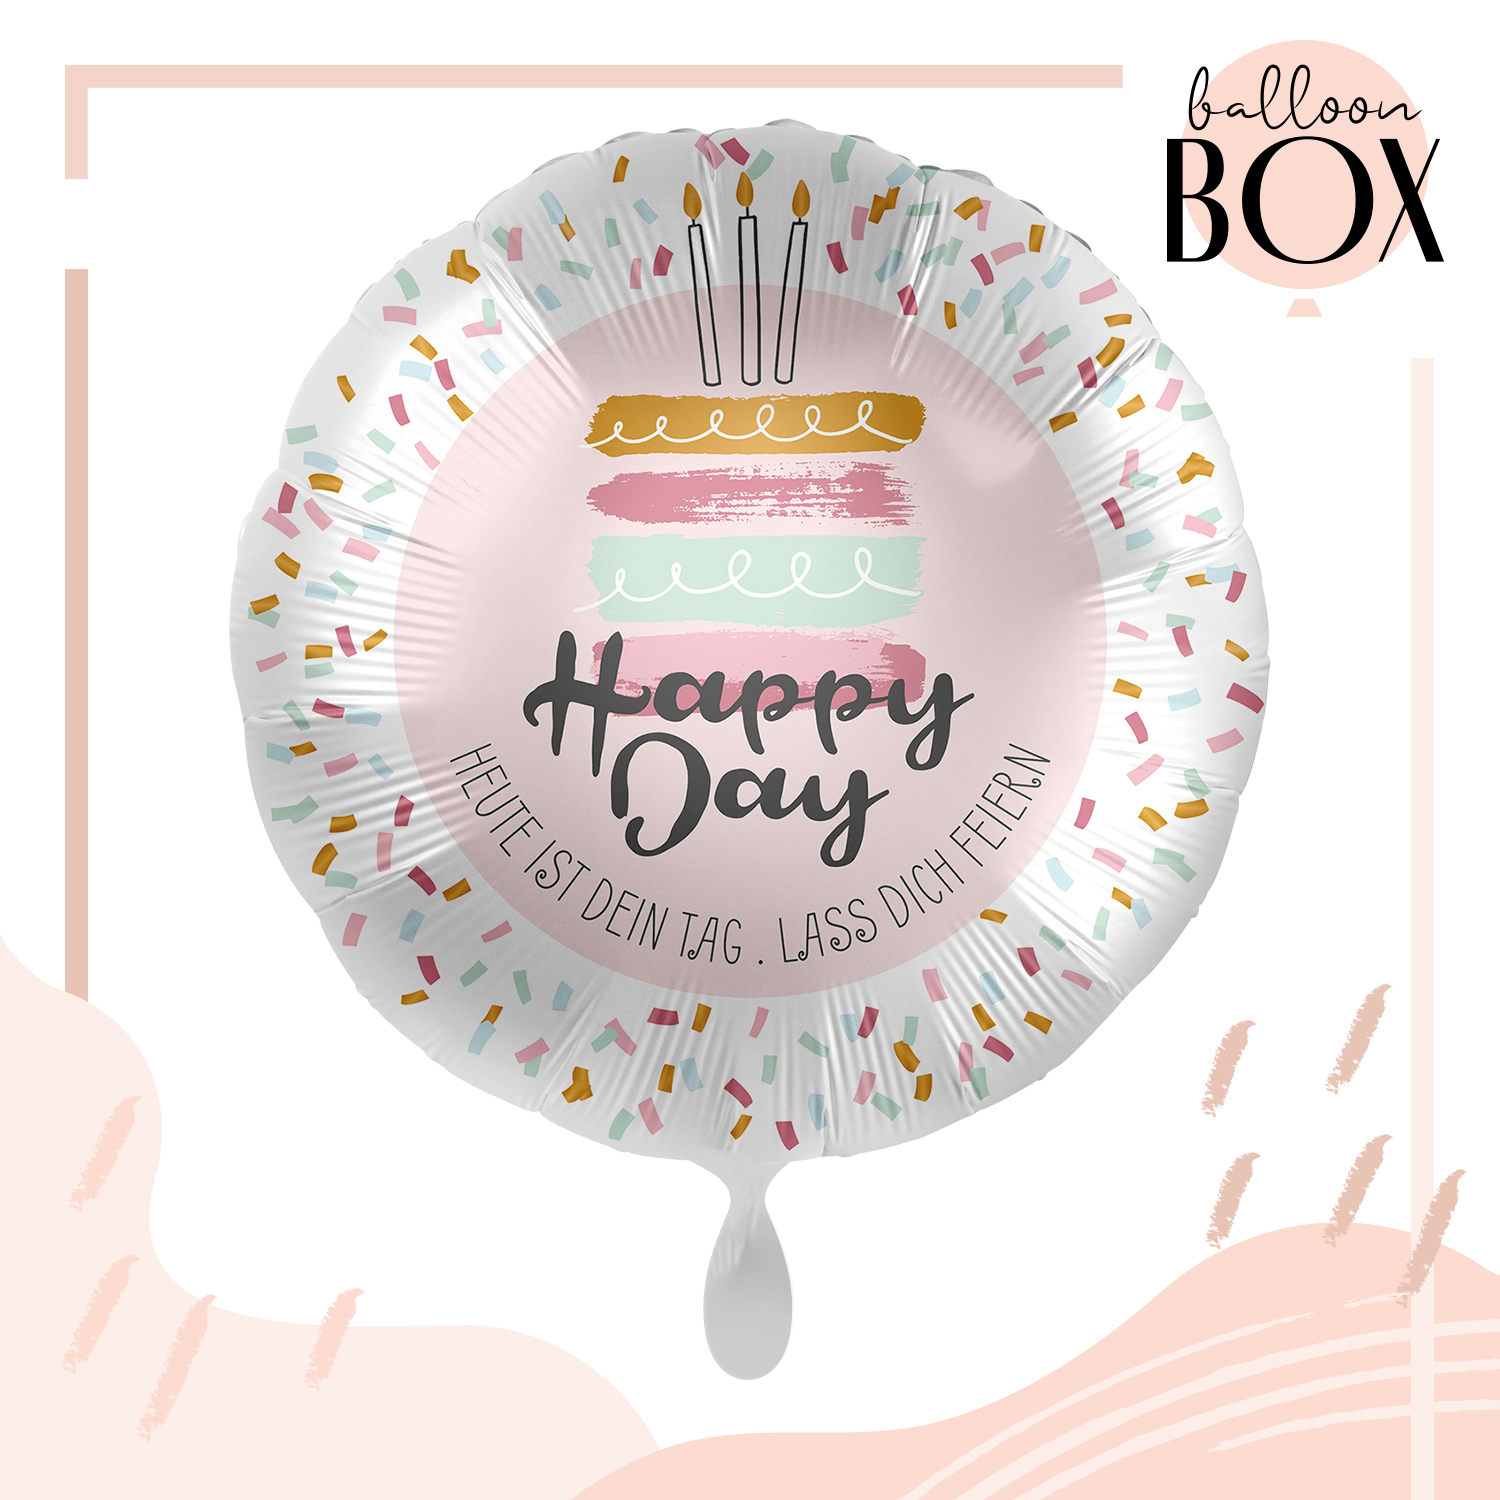 Heliumballon in a Box - Happy Day Cake